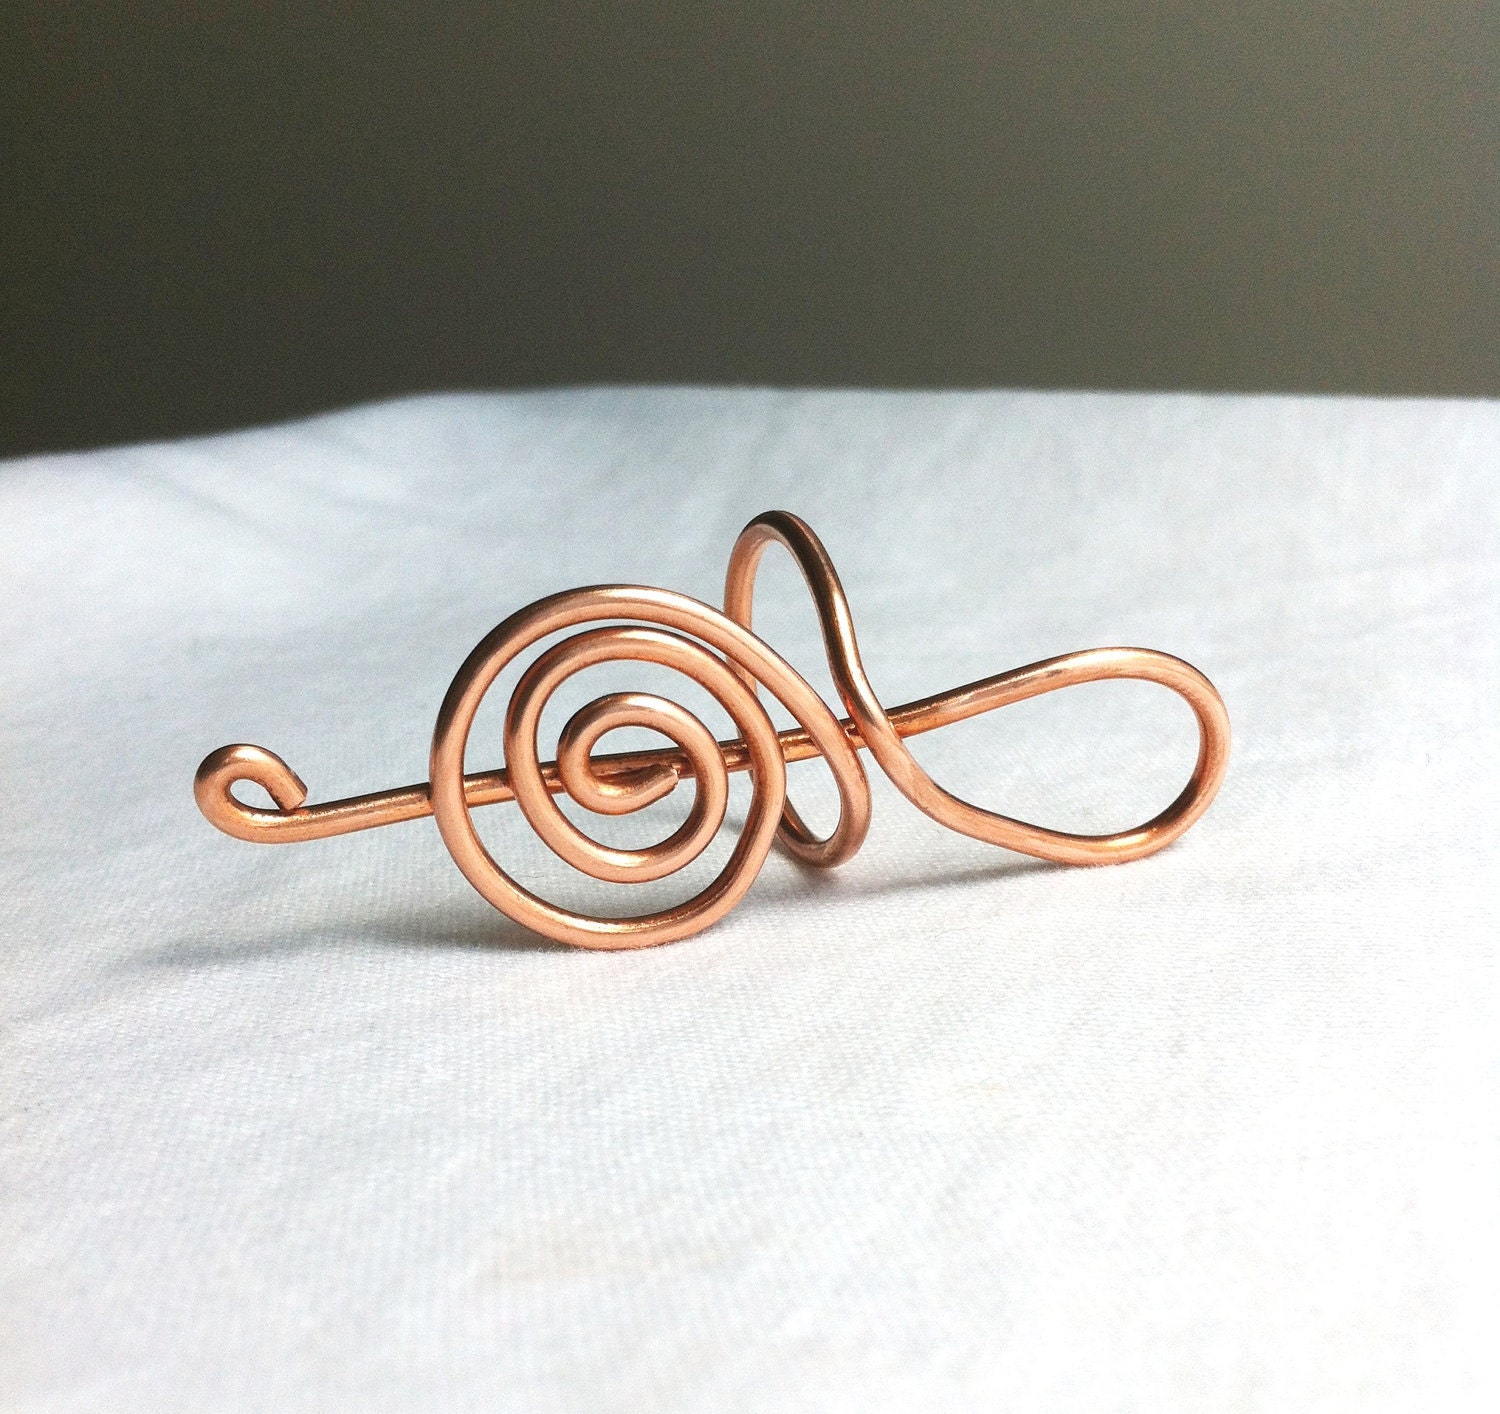 NOTHIN' BUT TREBLE - Forged Copper Ring